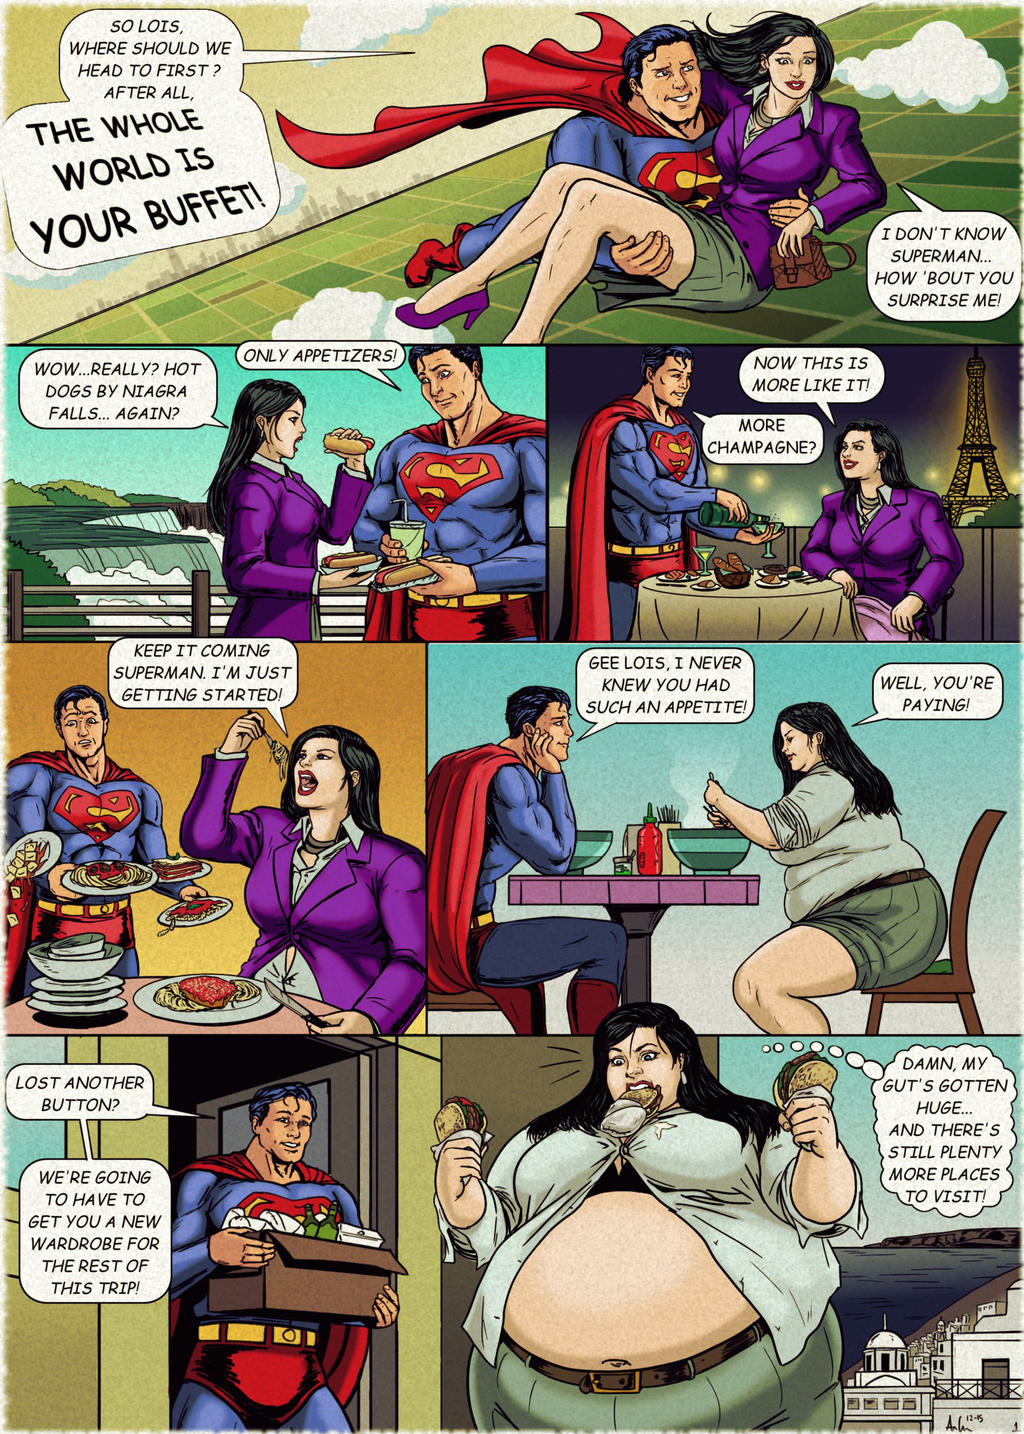 Lois Lane: The World is Your Buffet! by Ray-Norr